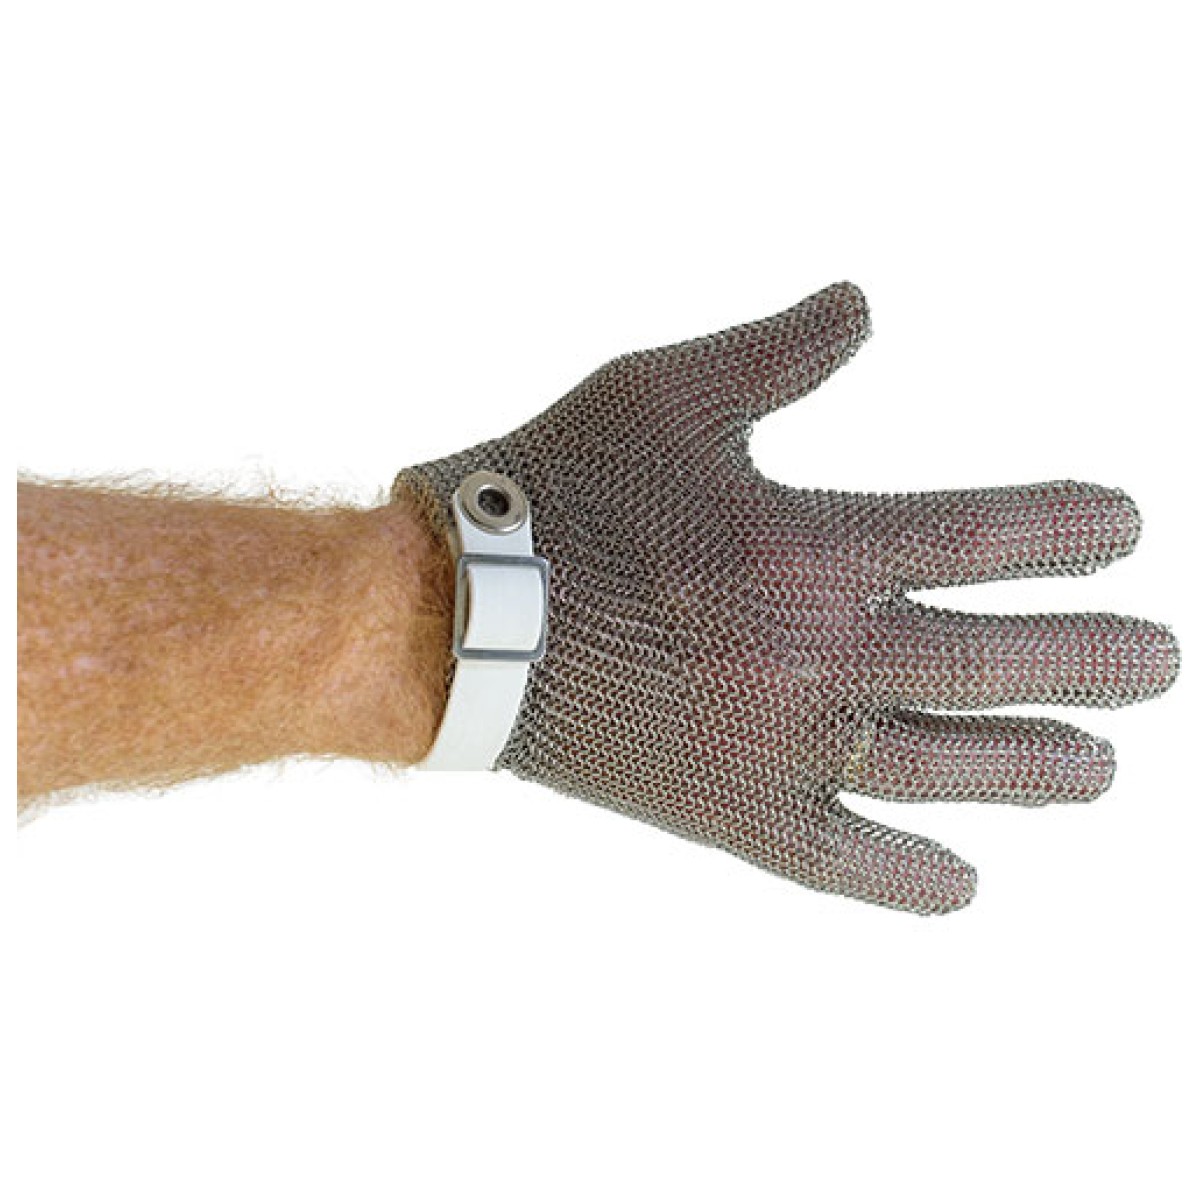 IDEAL MESH GLOVE 5 FNGR SML WHIT L HNDED